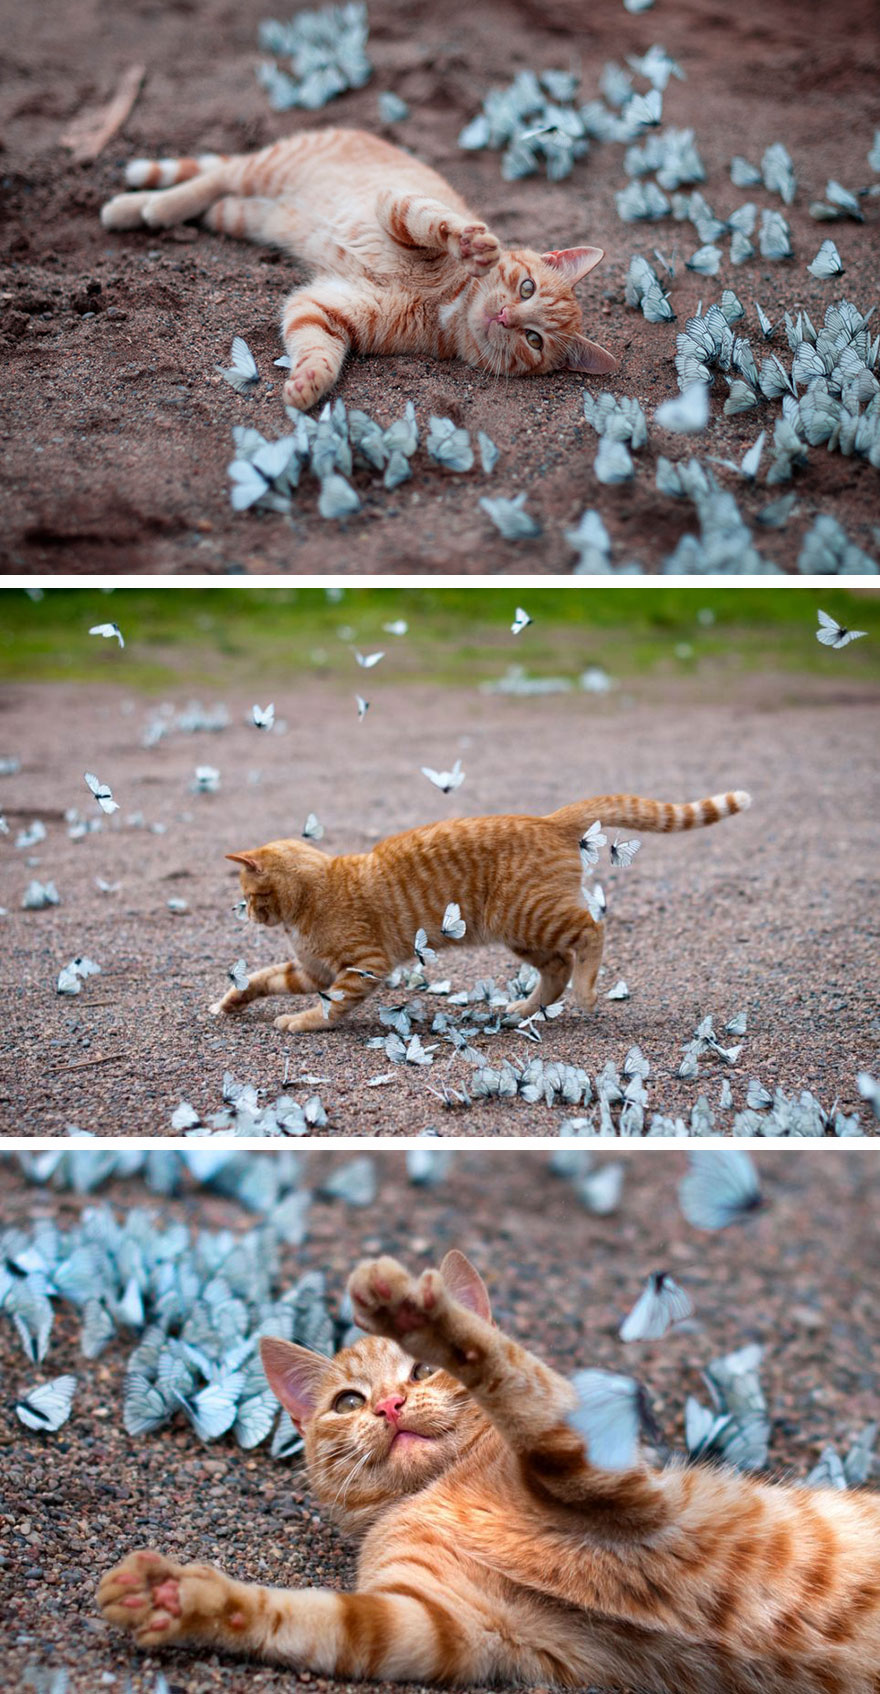 Garry playing with blue butterflies